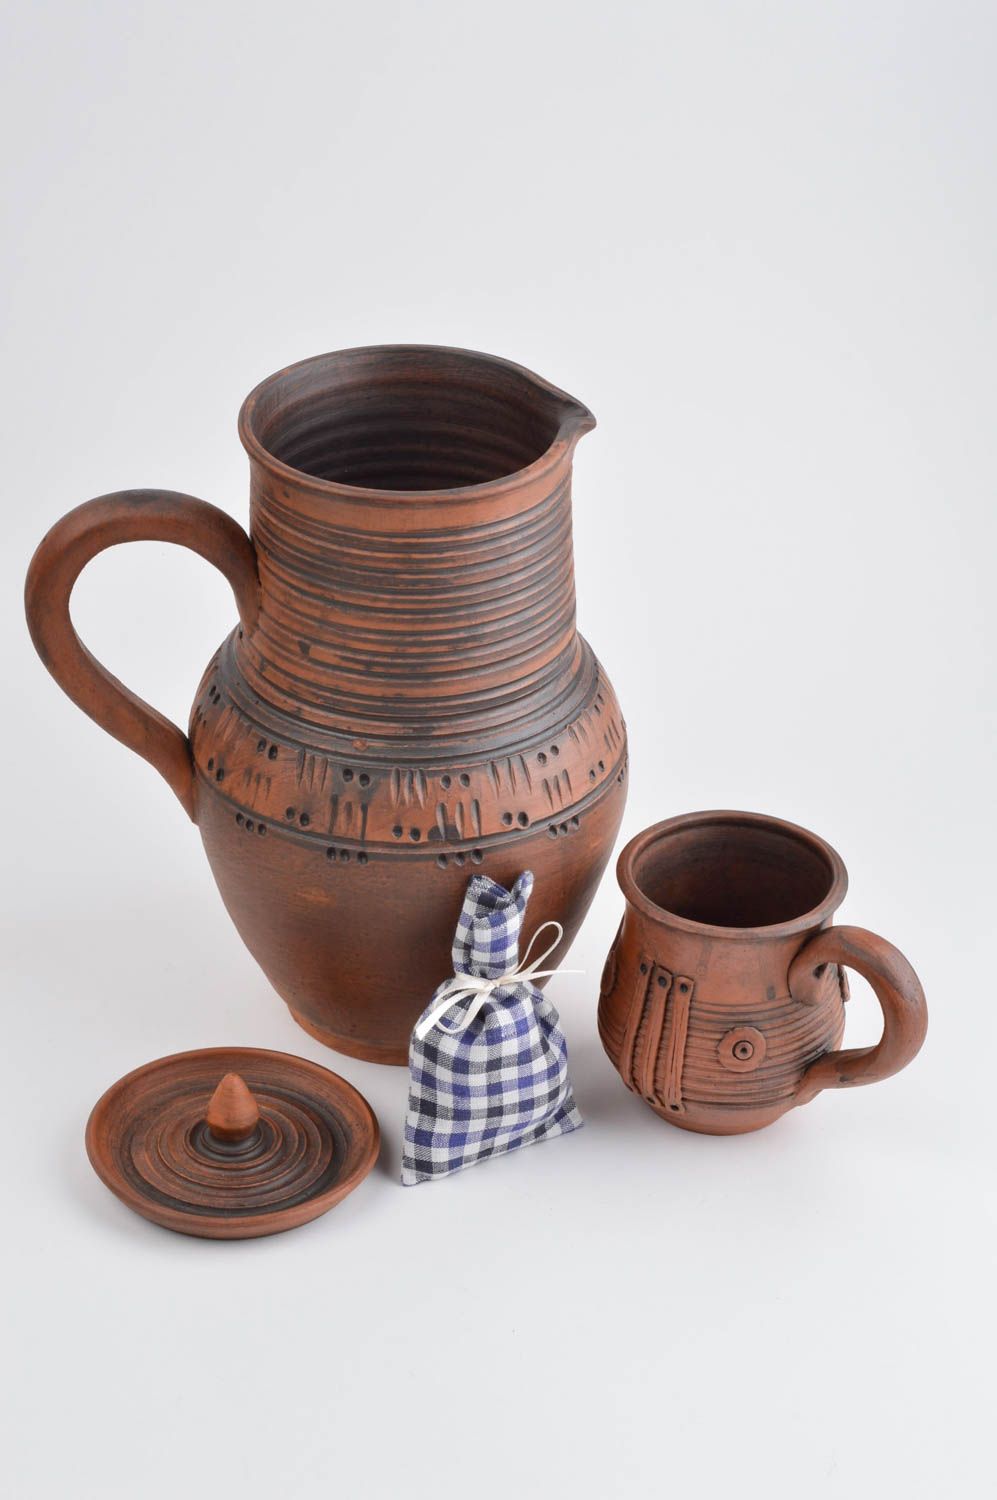 Village style 75 oz handmade clay water jug with clay creamer 9,84 inches 2,68 lb photo 1